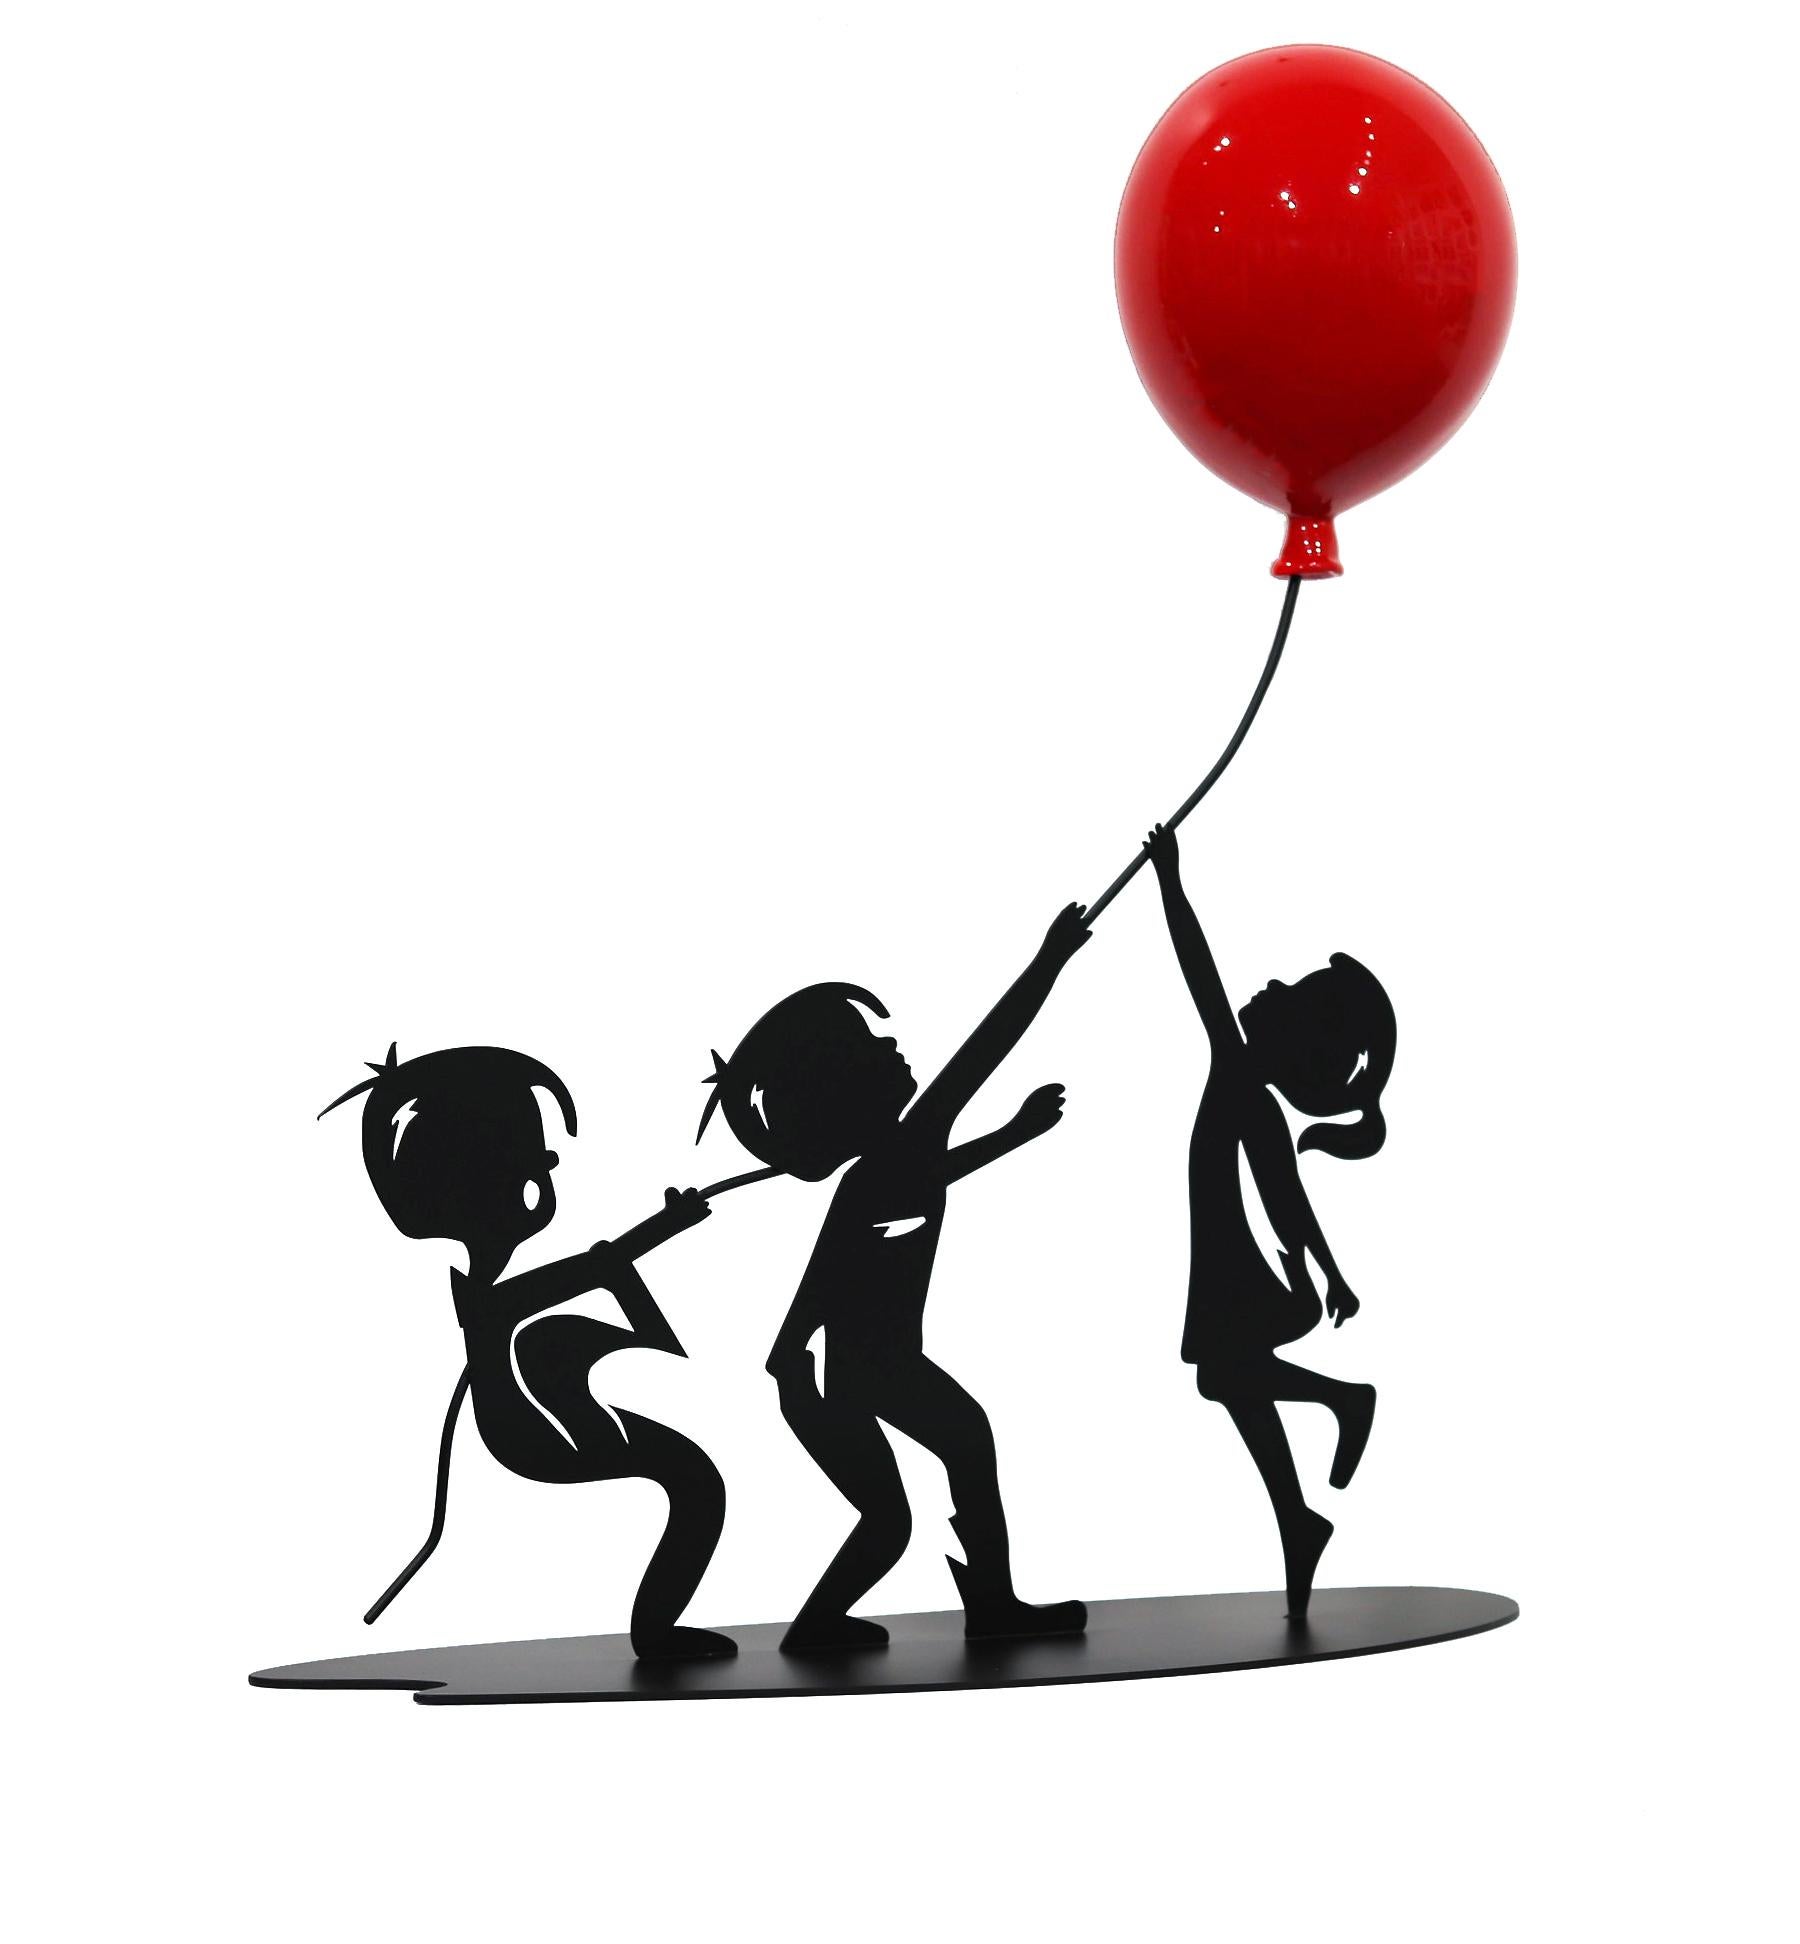 Big Dreams - Figurative Steel Sculpture with Glossy Red Balloon